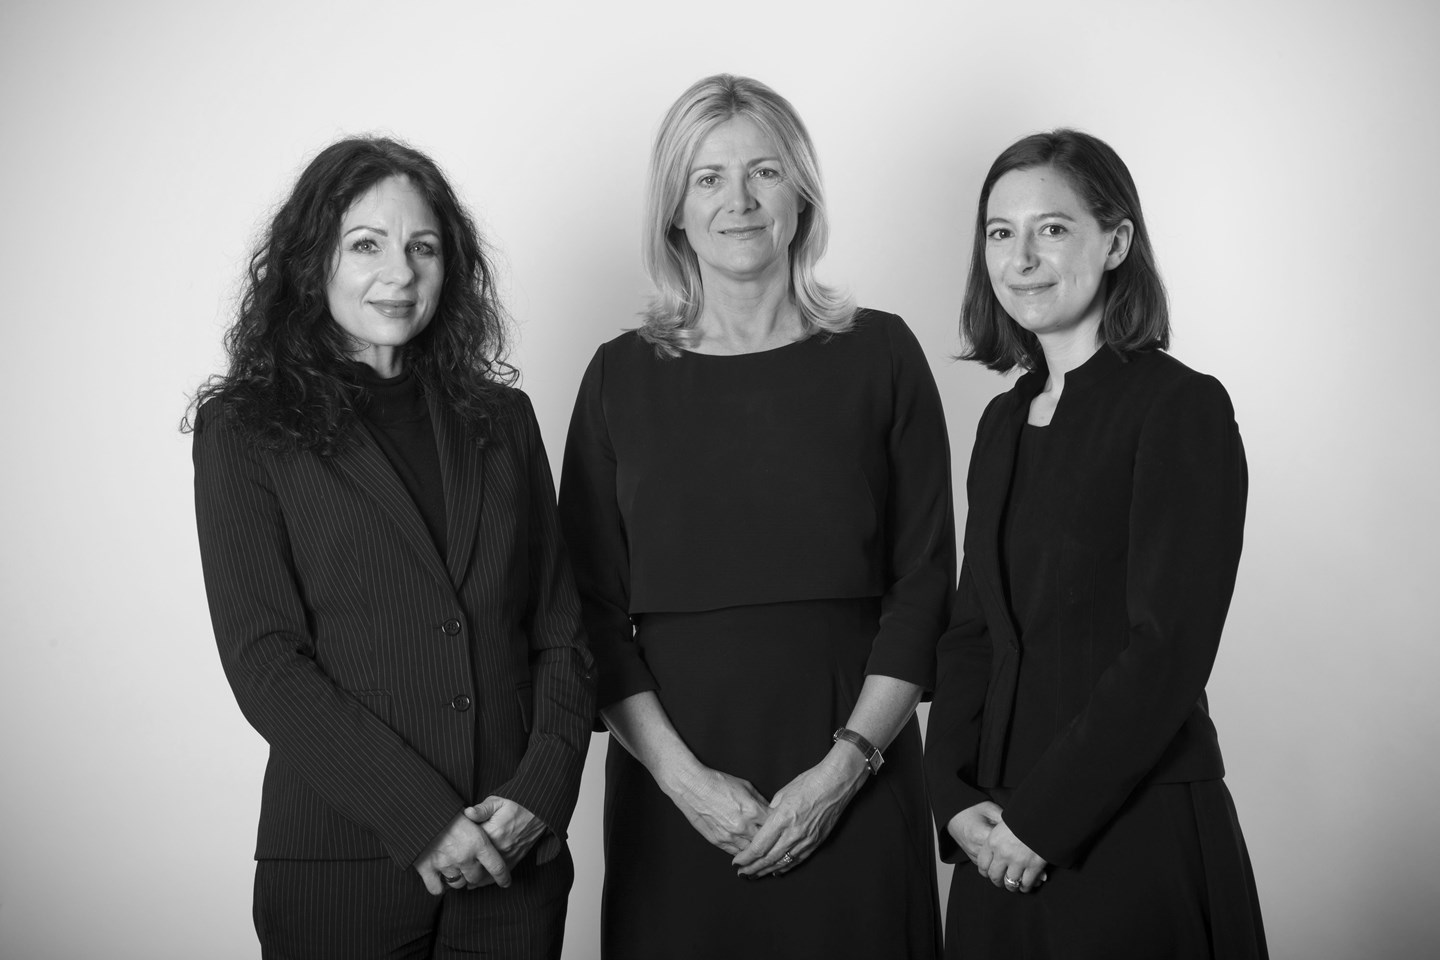 Centre Directors (from left to right): Sandie Gaines, Jill Howell-Williams, Zoe King